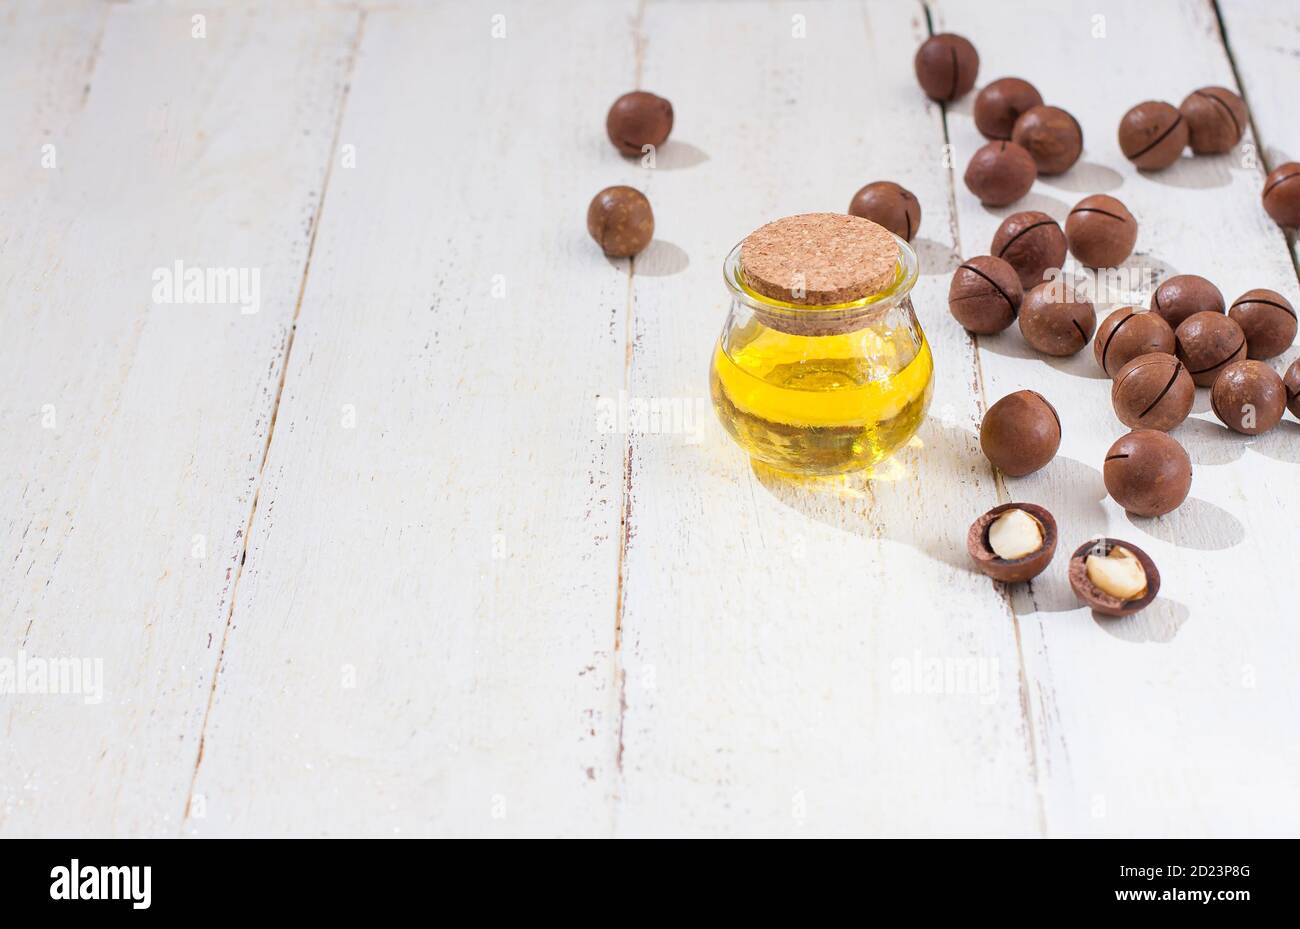 Natural macadamia oil and Macadamia nuts on wooden white board. Healthy product. Healthy food concept. Stock Photo